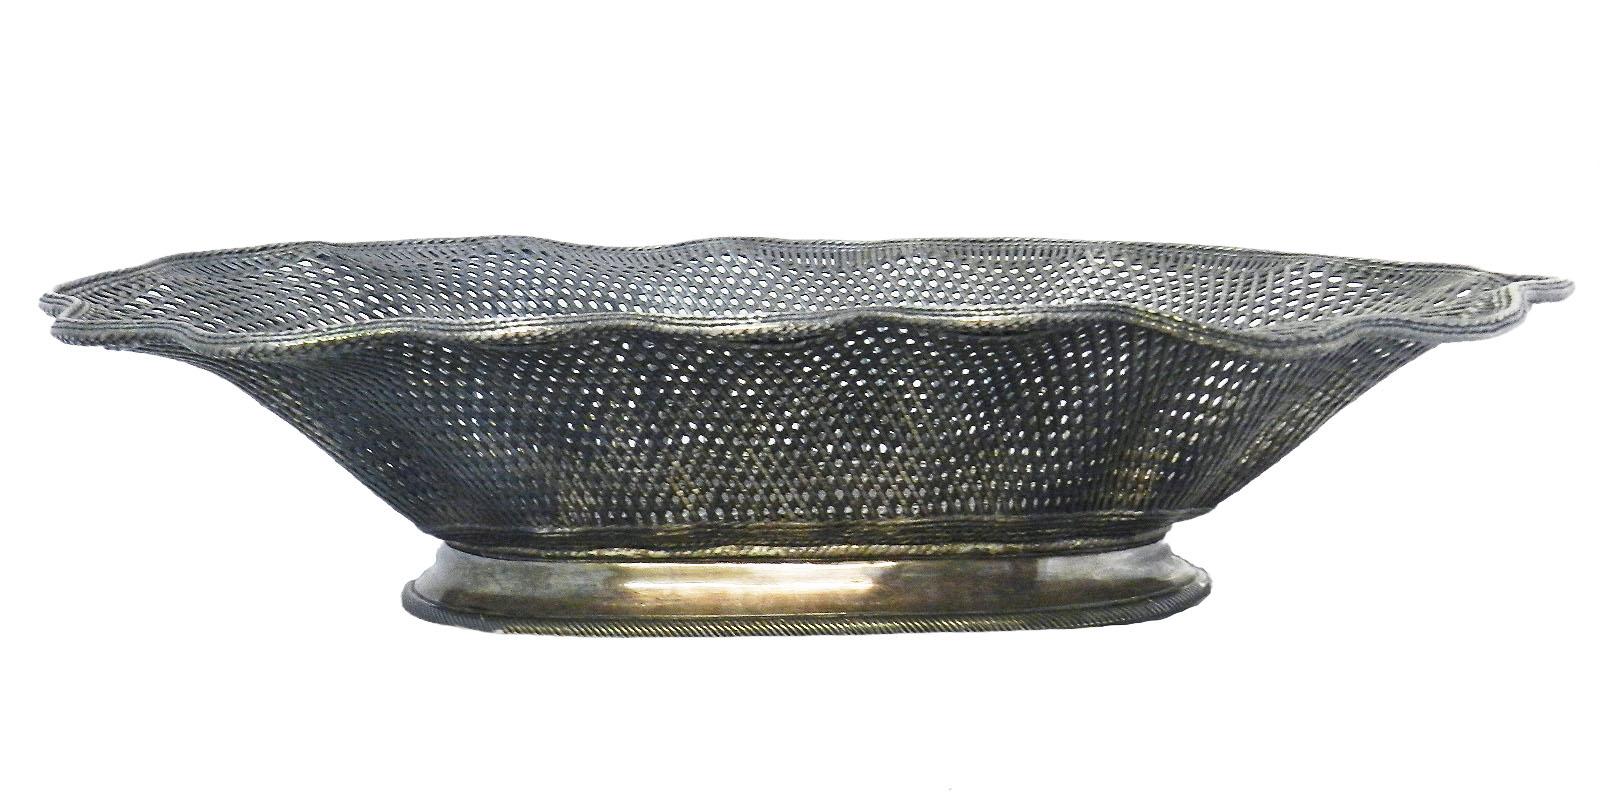 Christofle basket weave serving bowl fruit bread, late 19th century early 20th century
High quality silver plate 
Good and heavy
Marked Christofle and numbered for turn of the century
In very good condition for its age the Christofle name mark